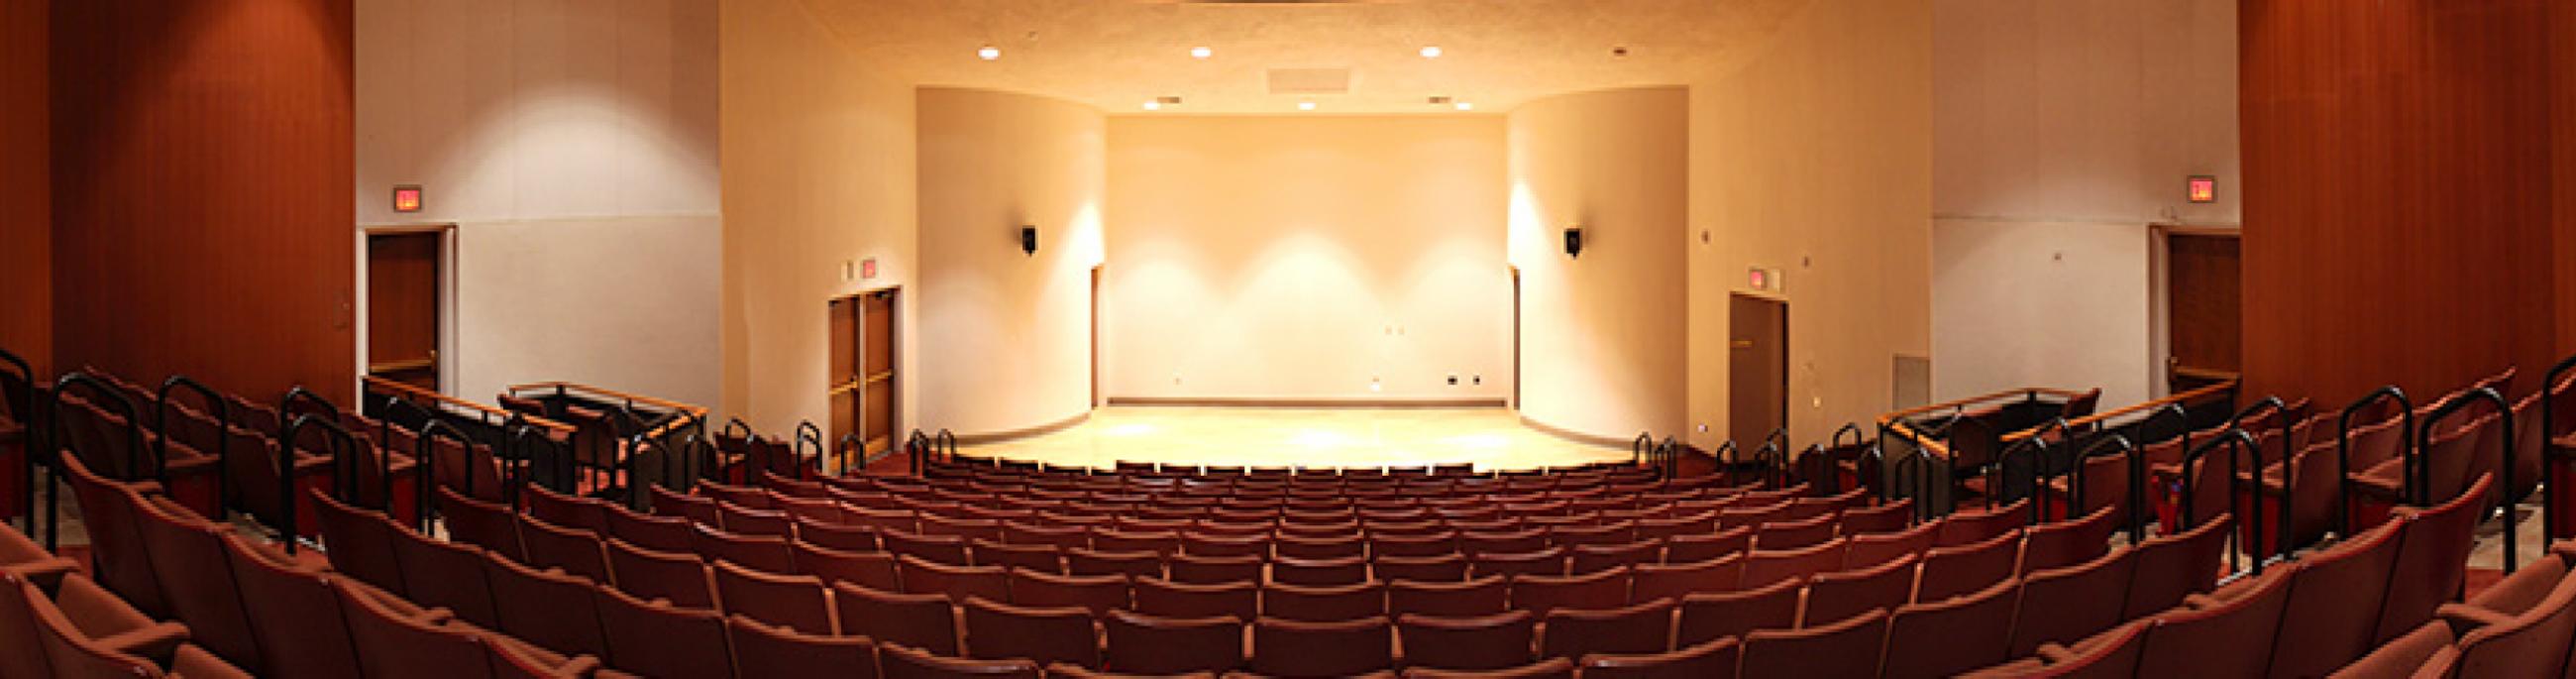 CCA's Recital Hall stage provides optimal listening and viewing for smaller recitals, lectures